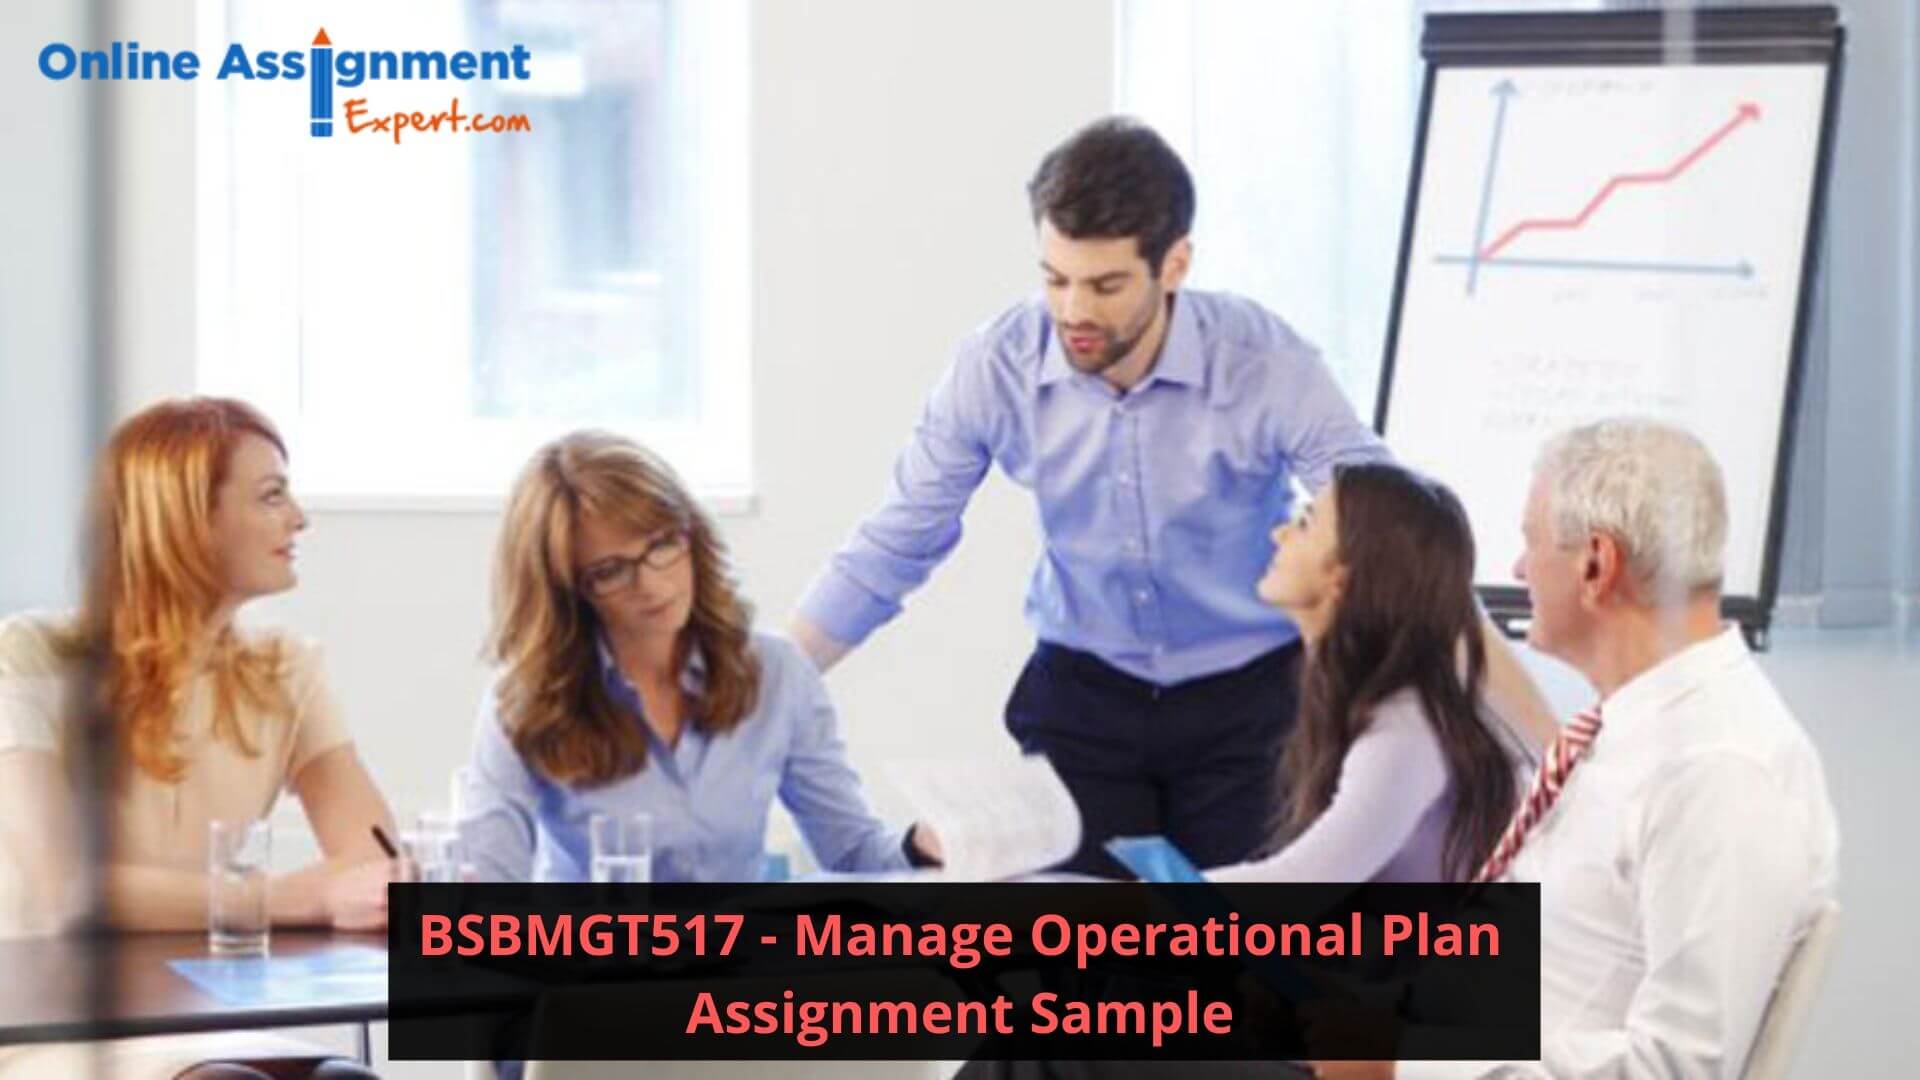 BSBMGT517 - Manage Operational Plan Assignment Sample